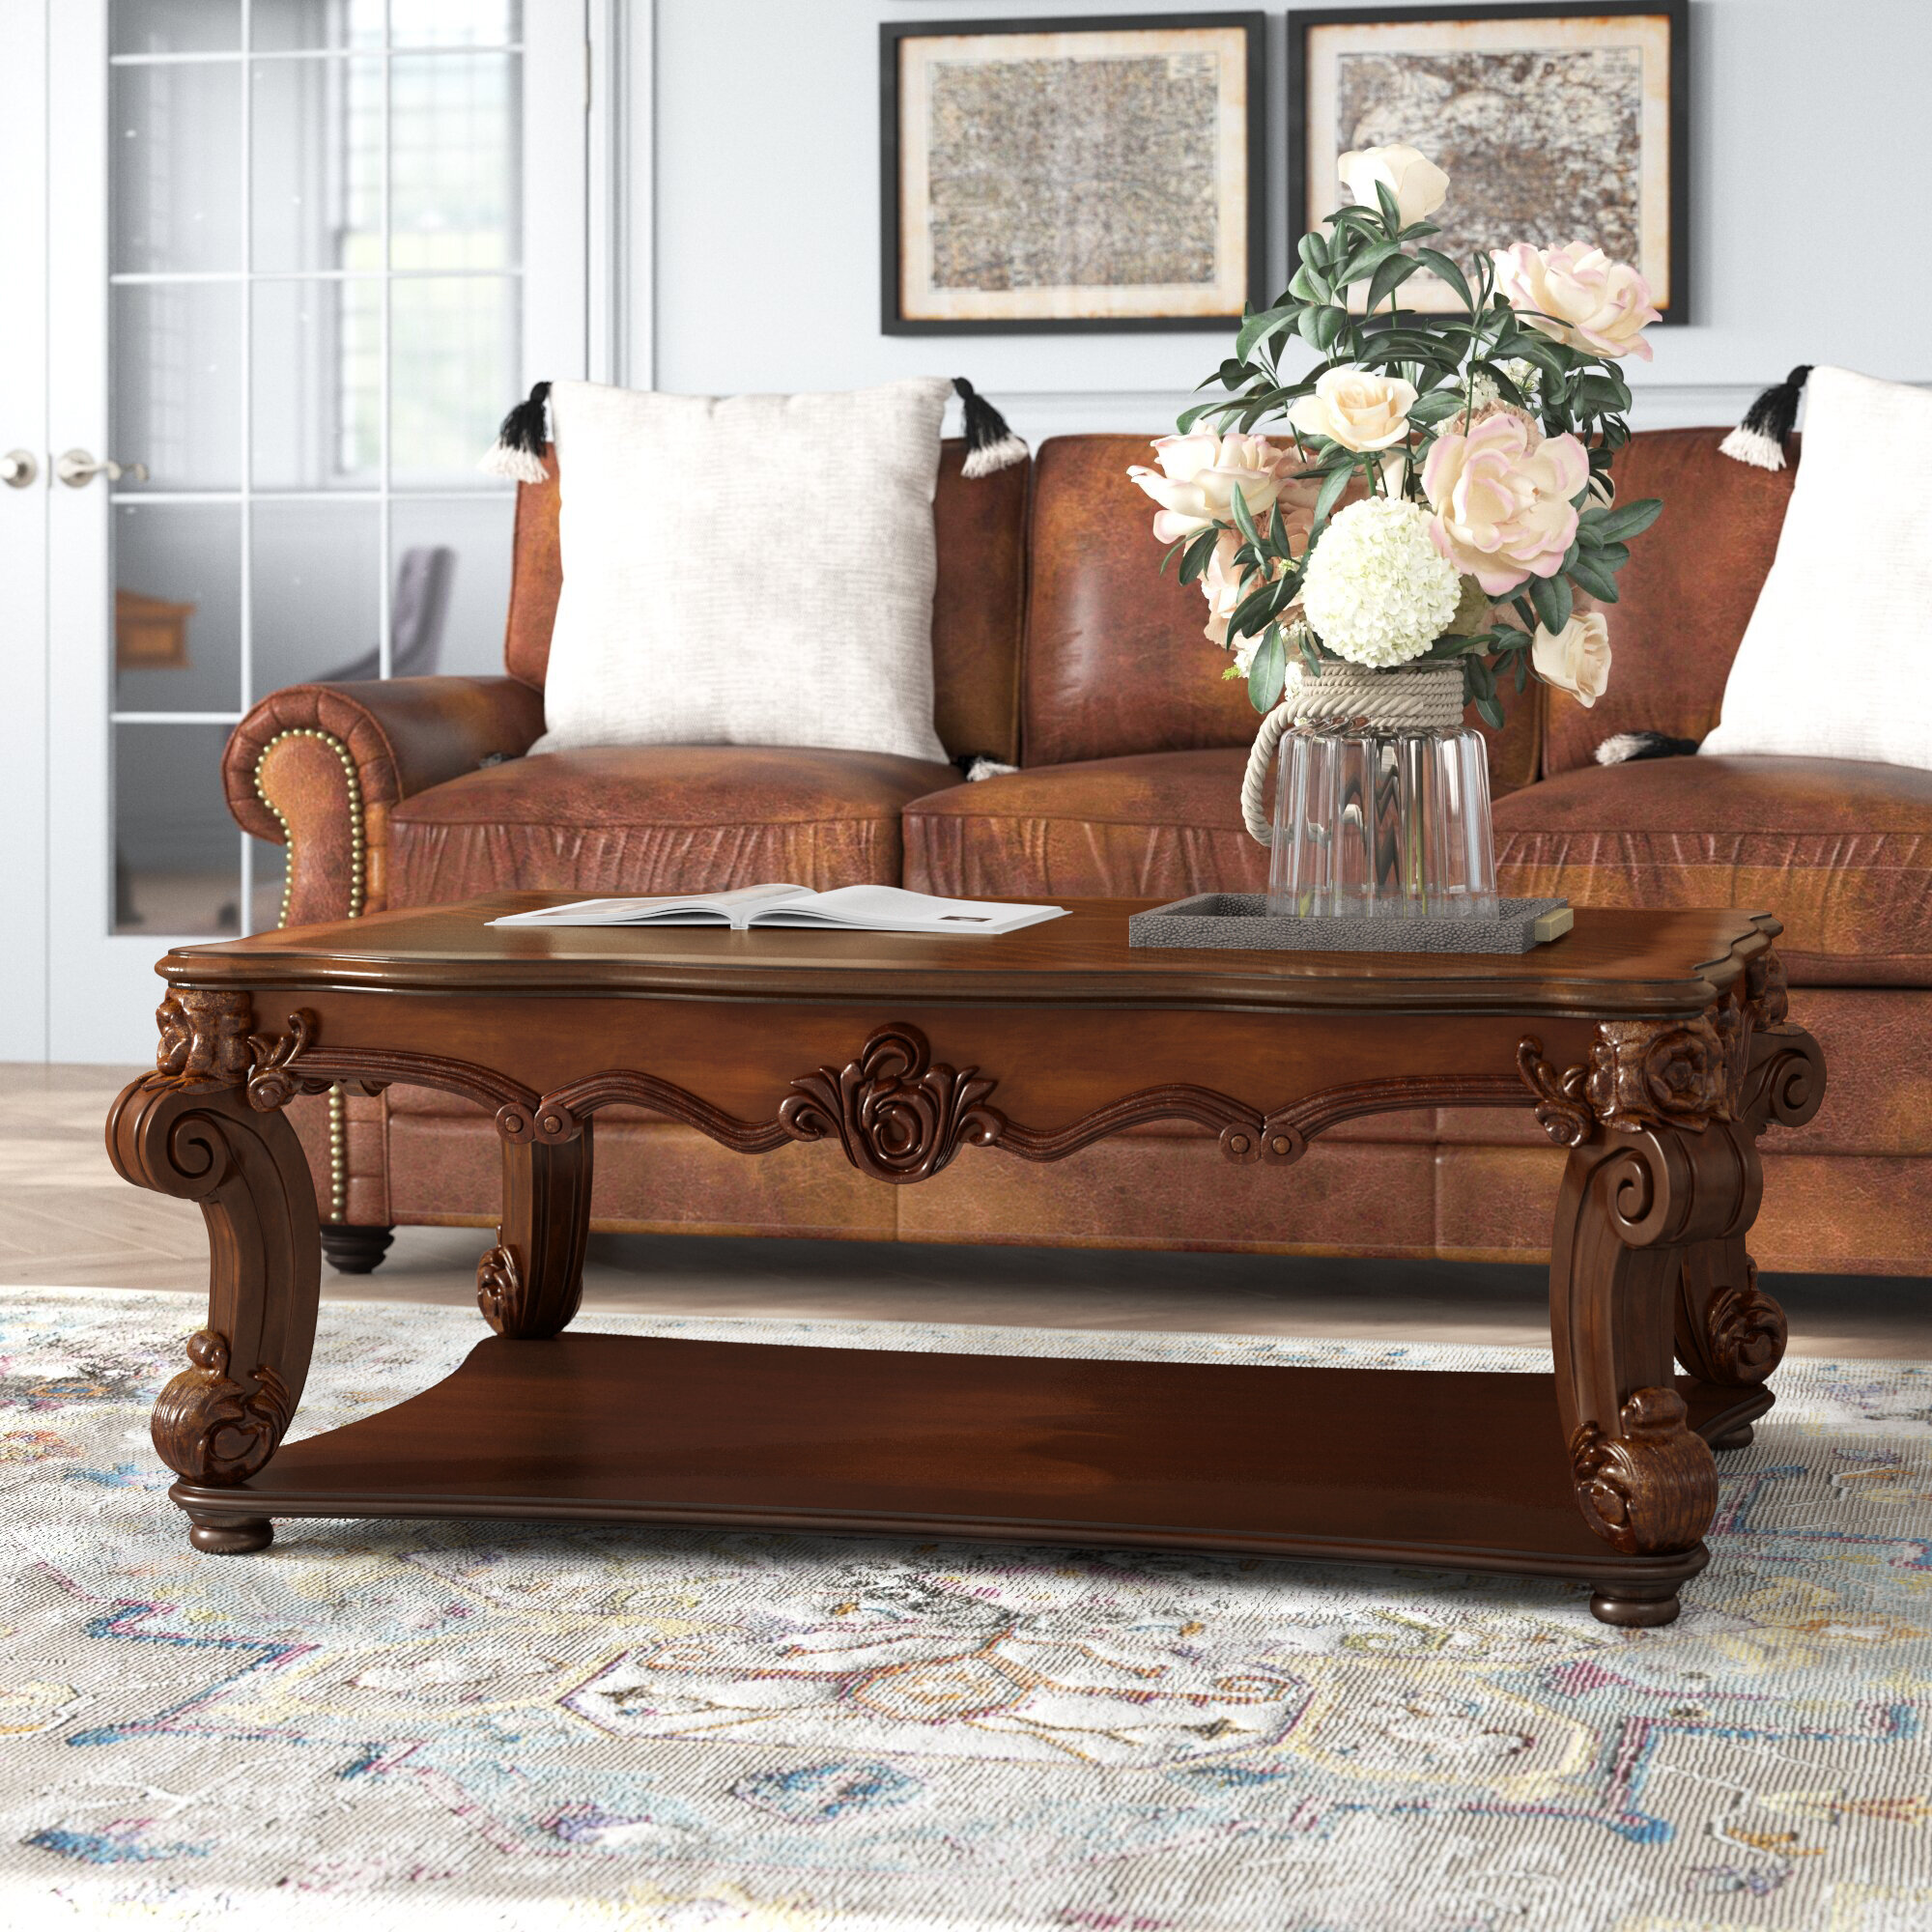 American Traditional Wood Coffee Table for Leather Couch